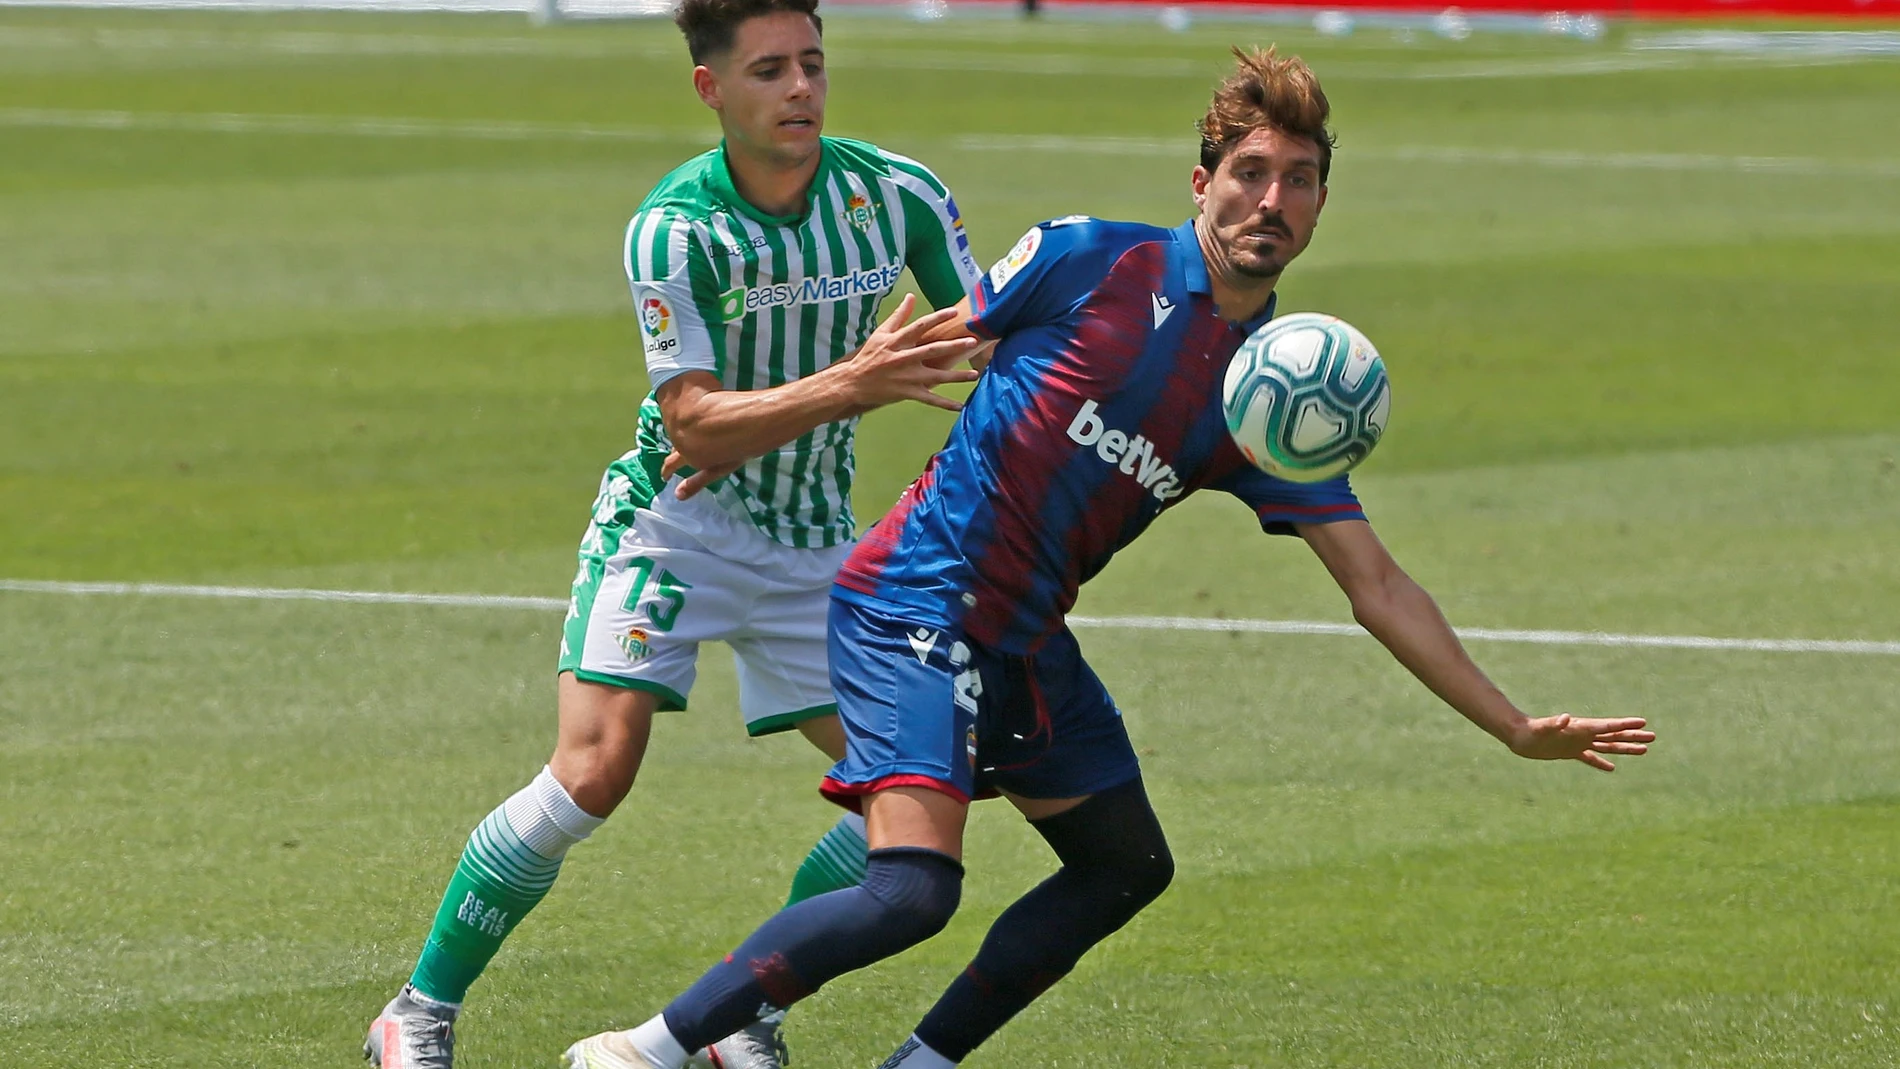 UD Levante vs. Real Betis